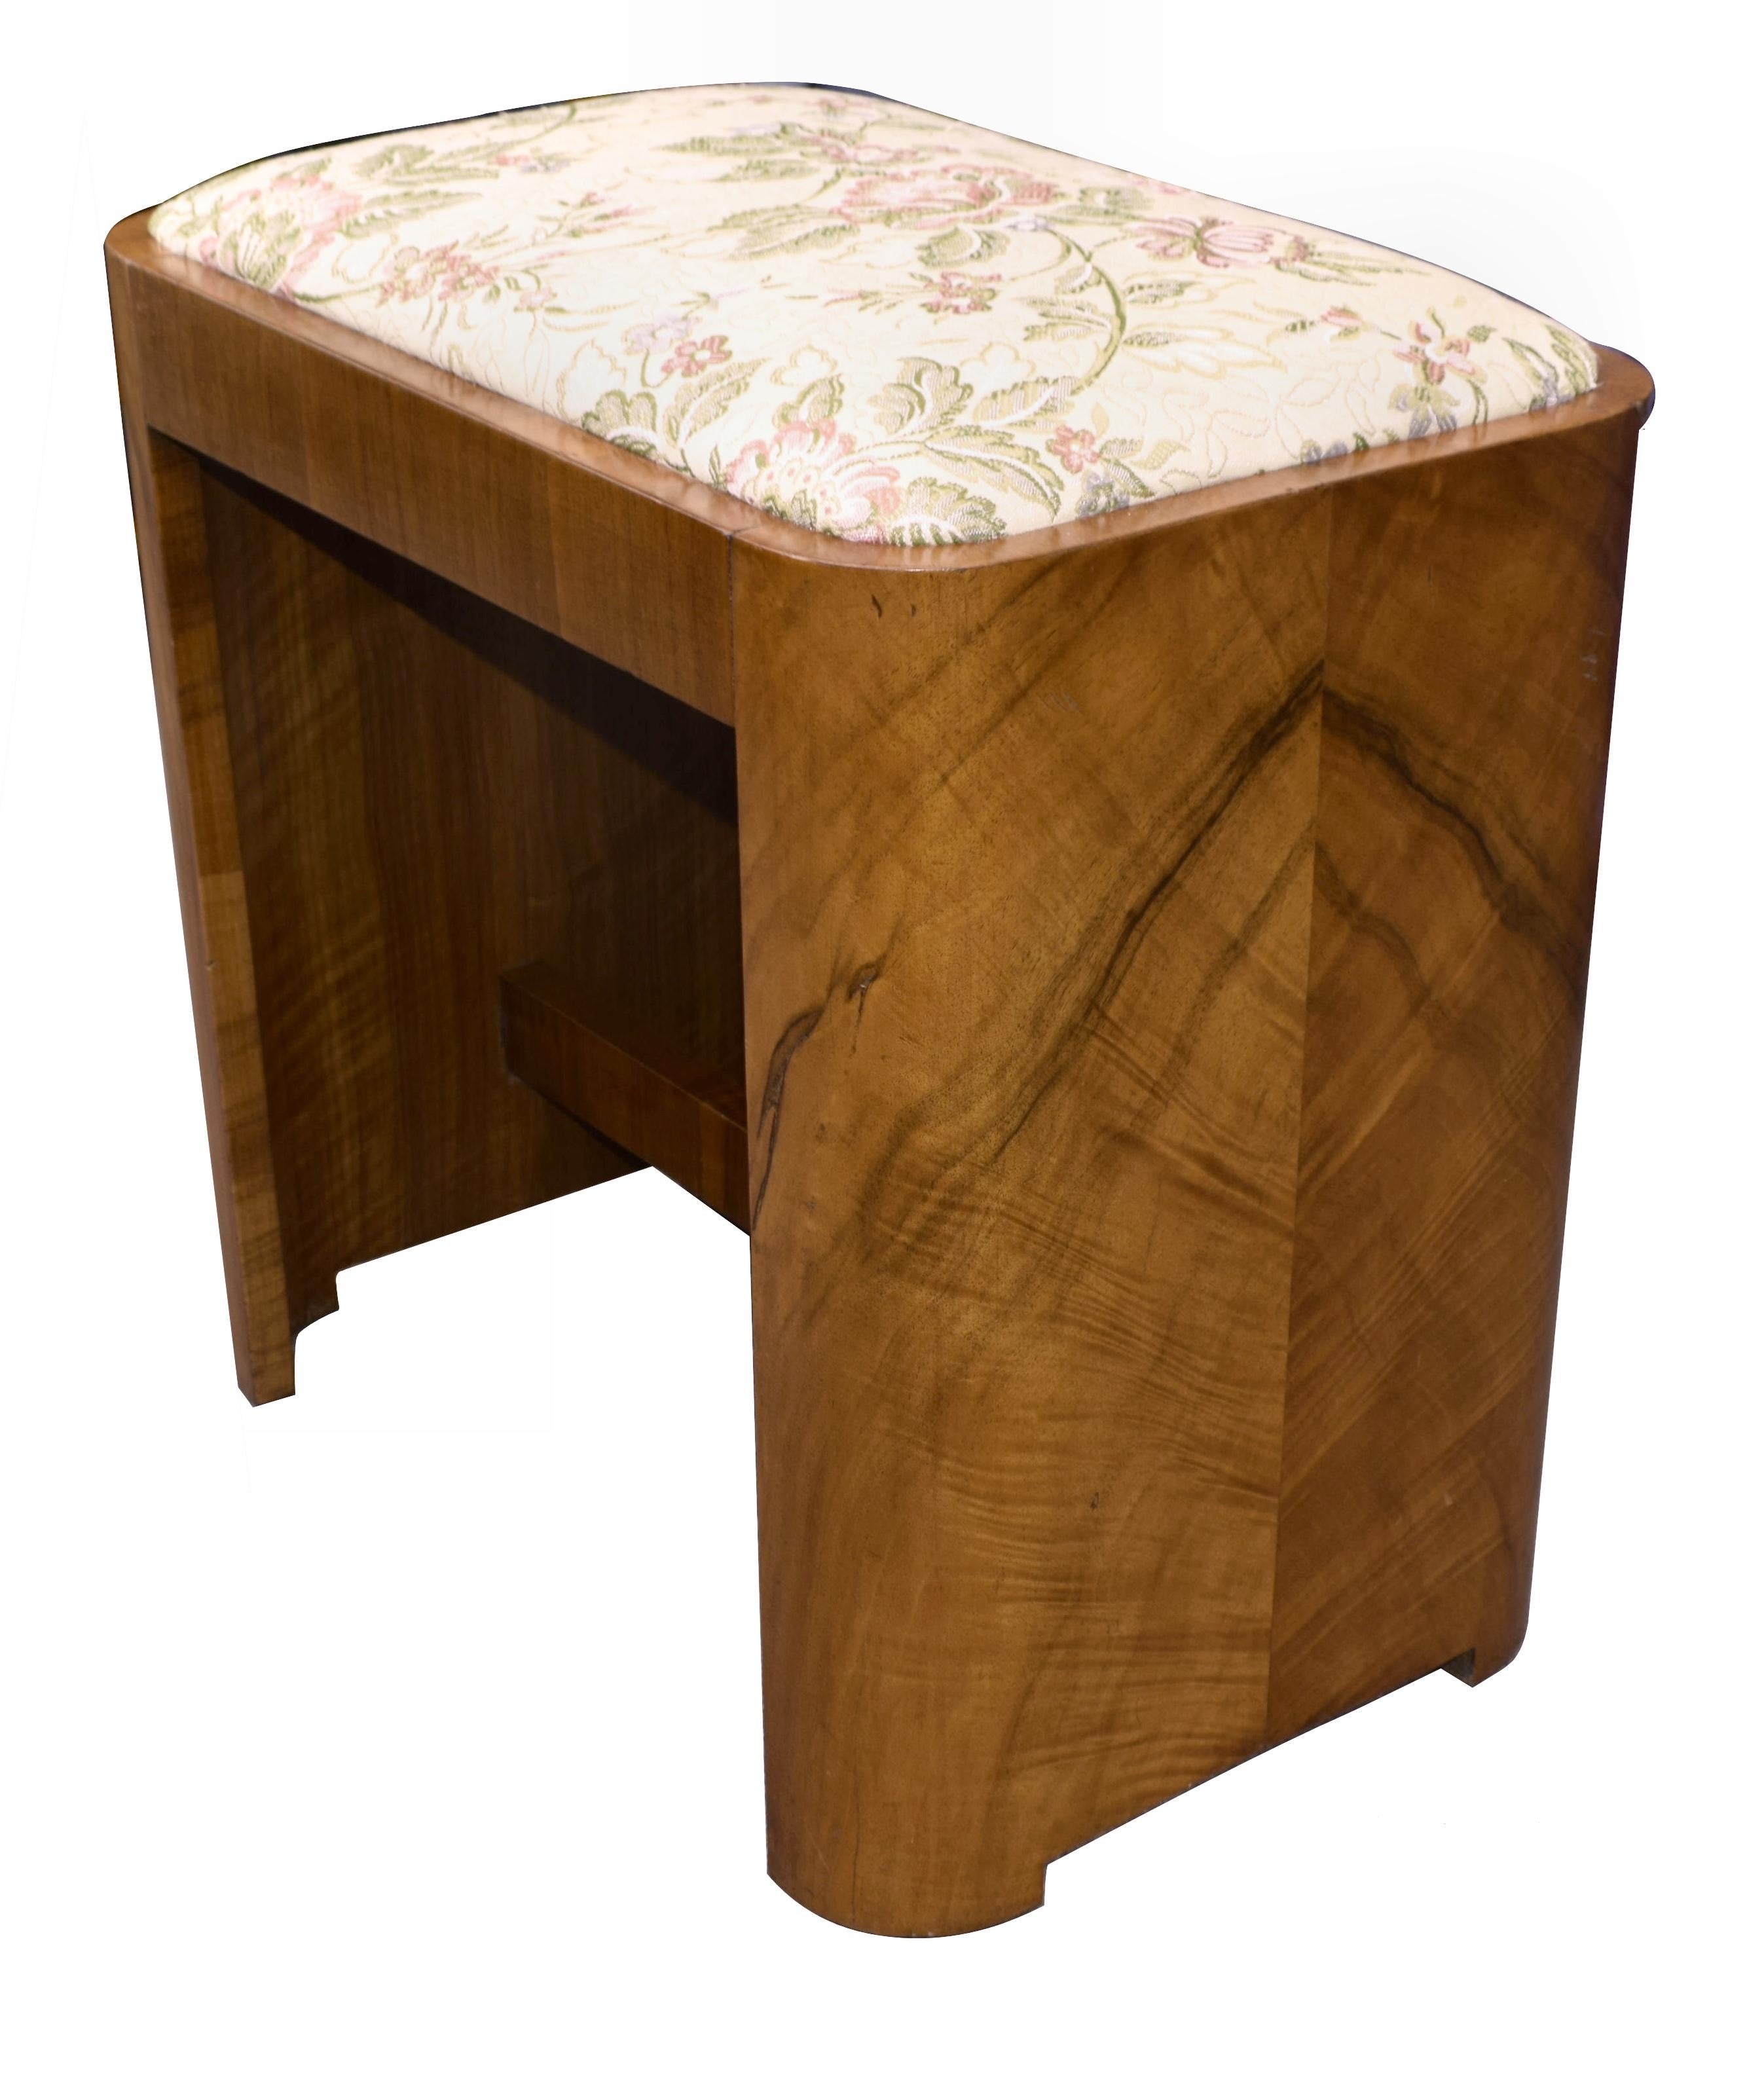 Very attractive, 1930s Art Deco figured walnut veneered stool. Although originally purposed as a bedroom stool there is nothing to stop you using this as a regular footstool. The two curved supports are the real hero of this piece, so simple and so